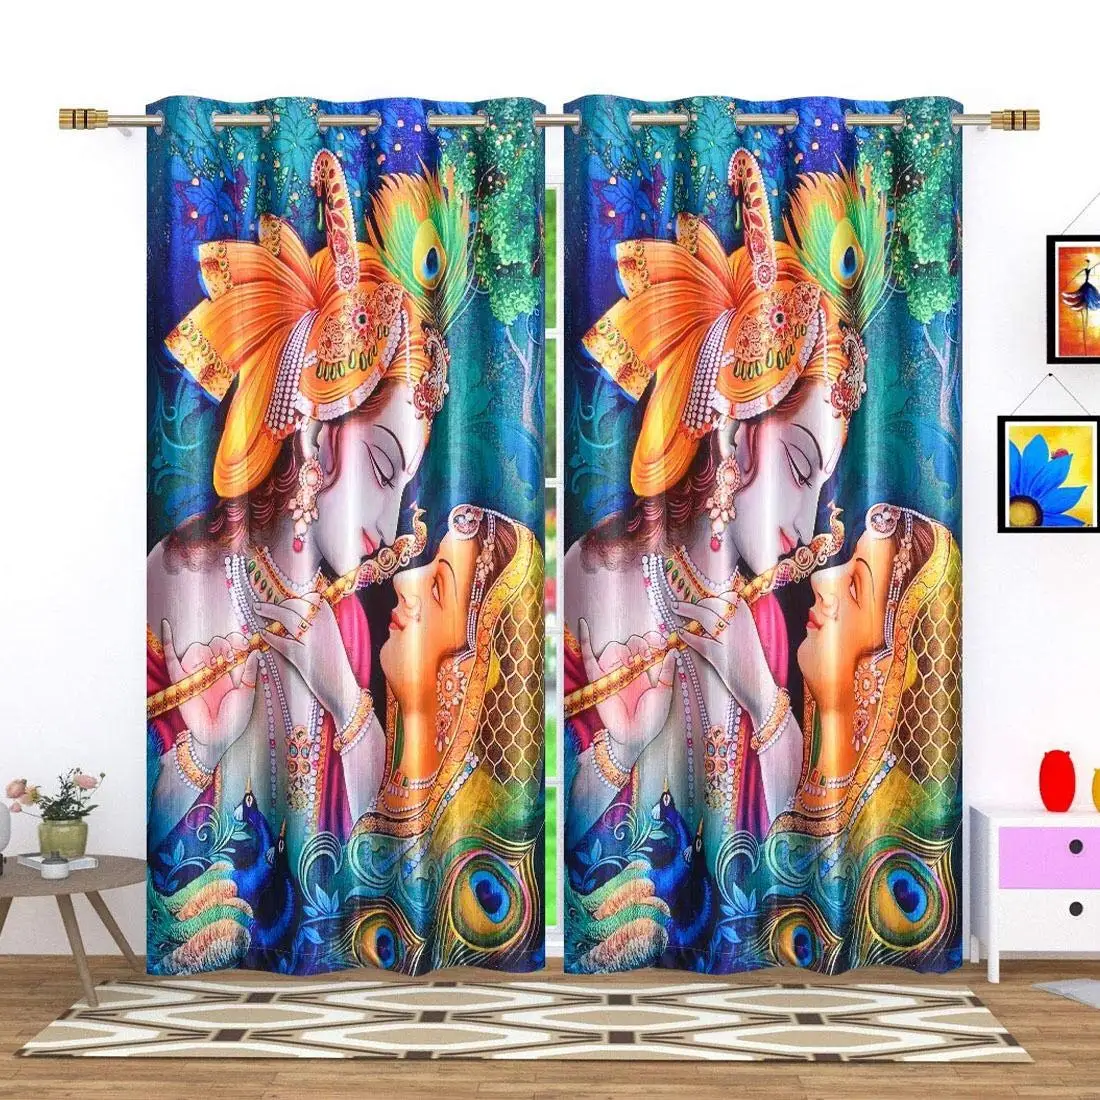 

3D God Digital Printed Home Furnishing Polyresin Curtains for Indian Festival Door Curtains Pack of 2 Pc